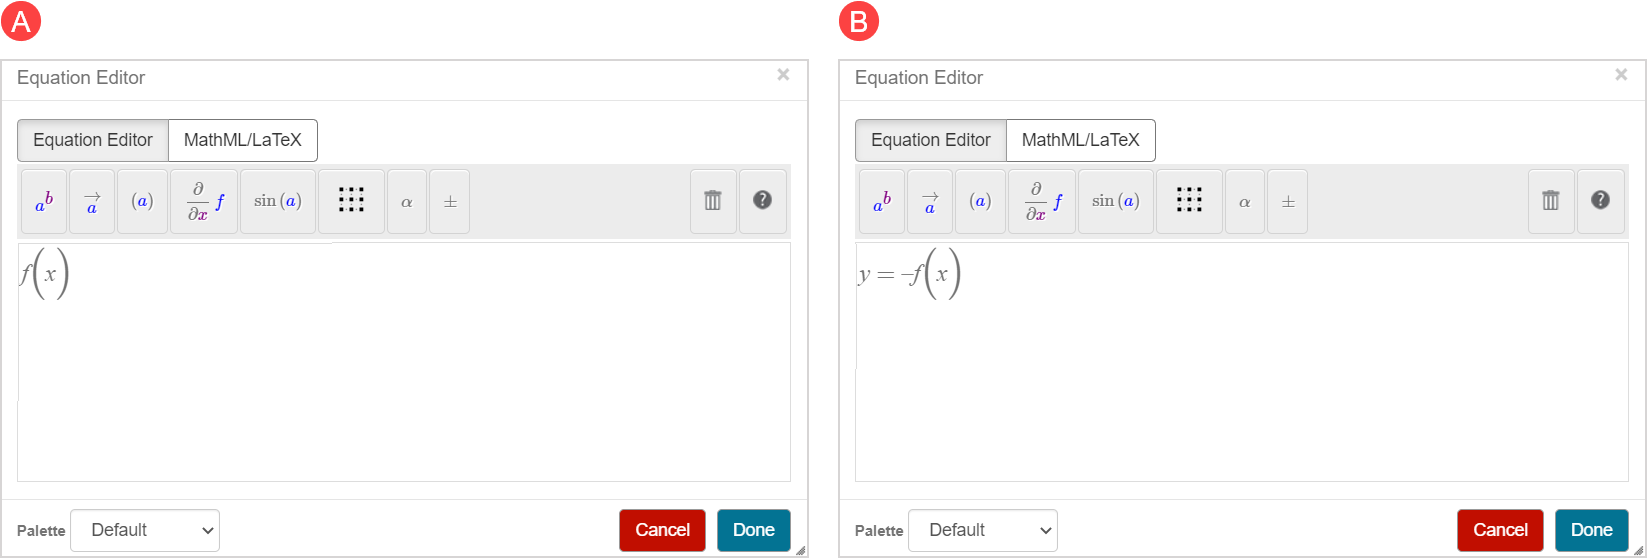 A and B represent the two functions and how they would appear when defined in the equation editor.